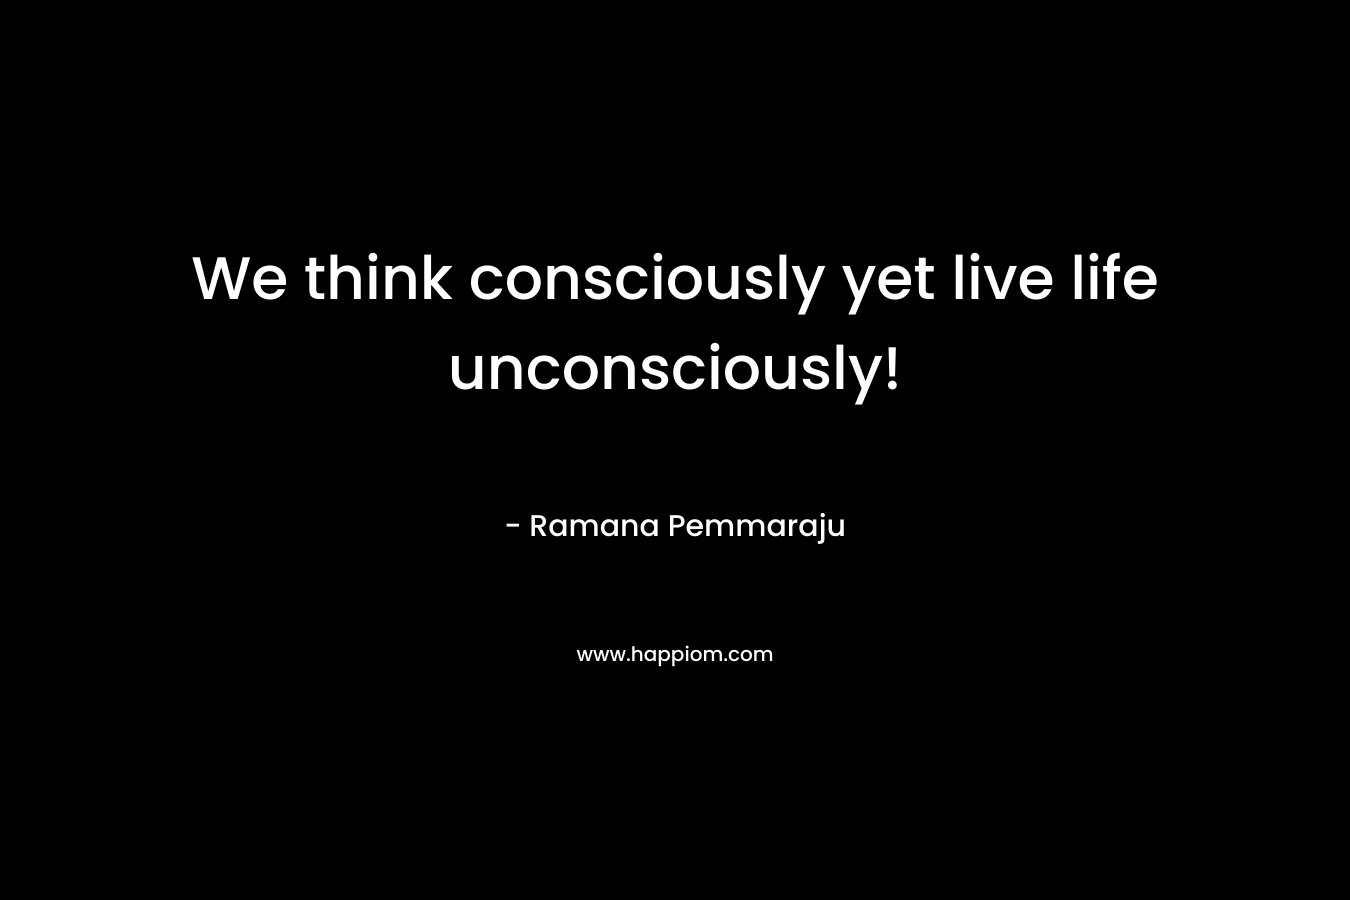 We think consciously yet live life unconsciously!